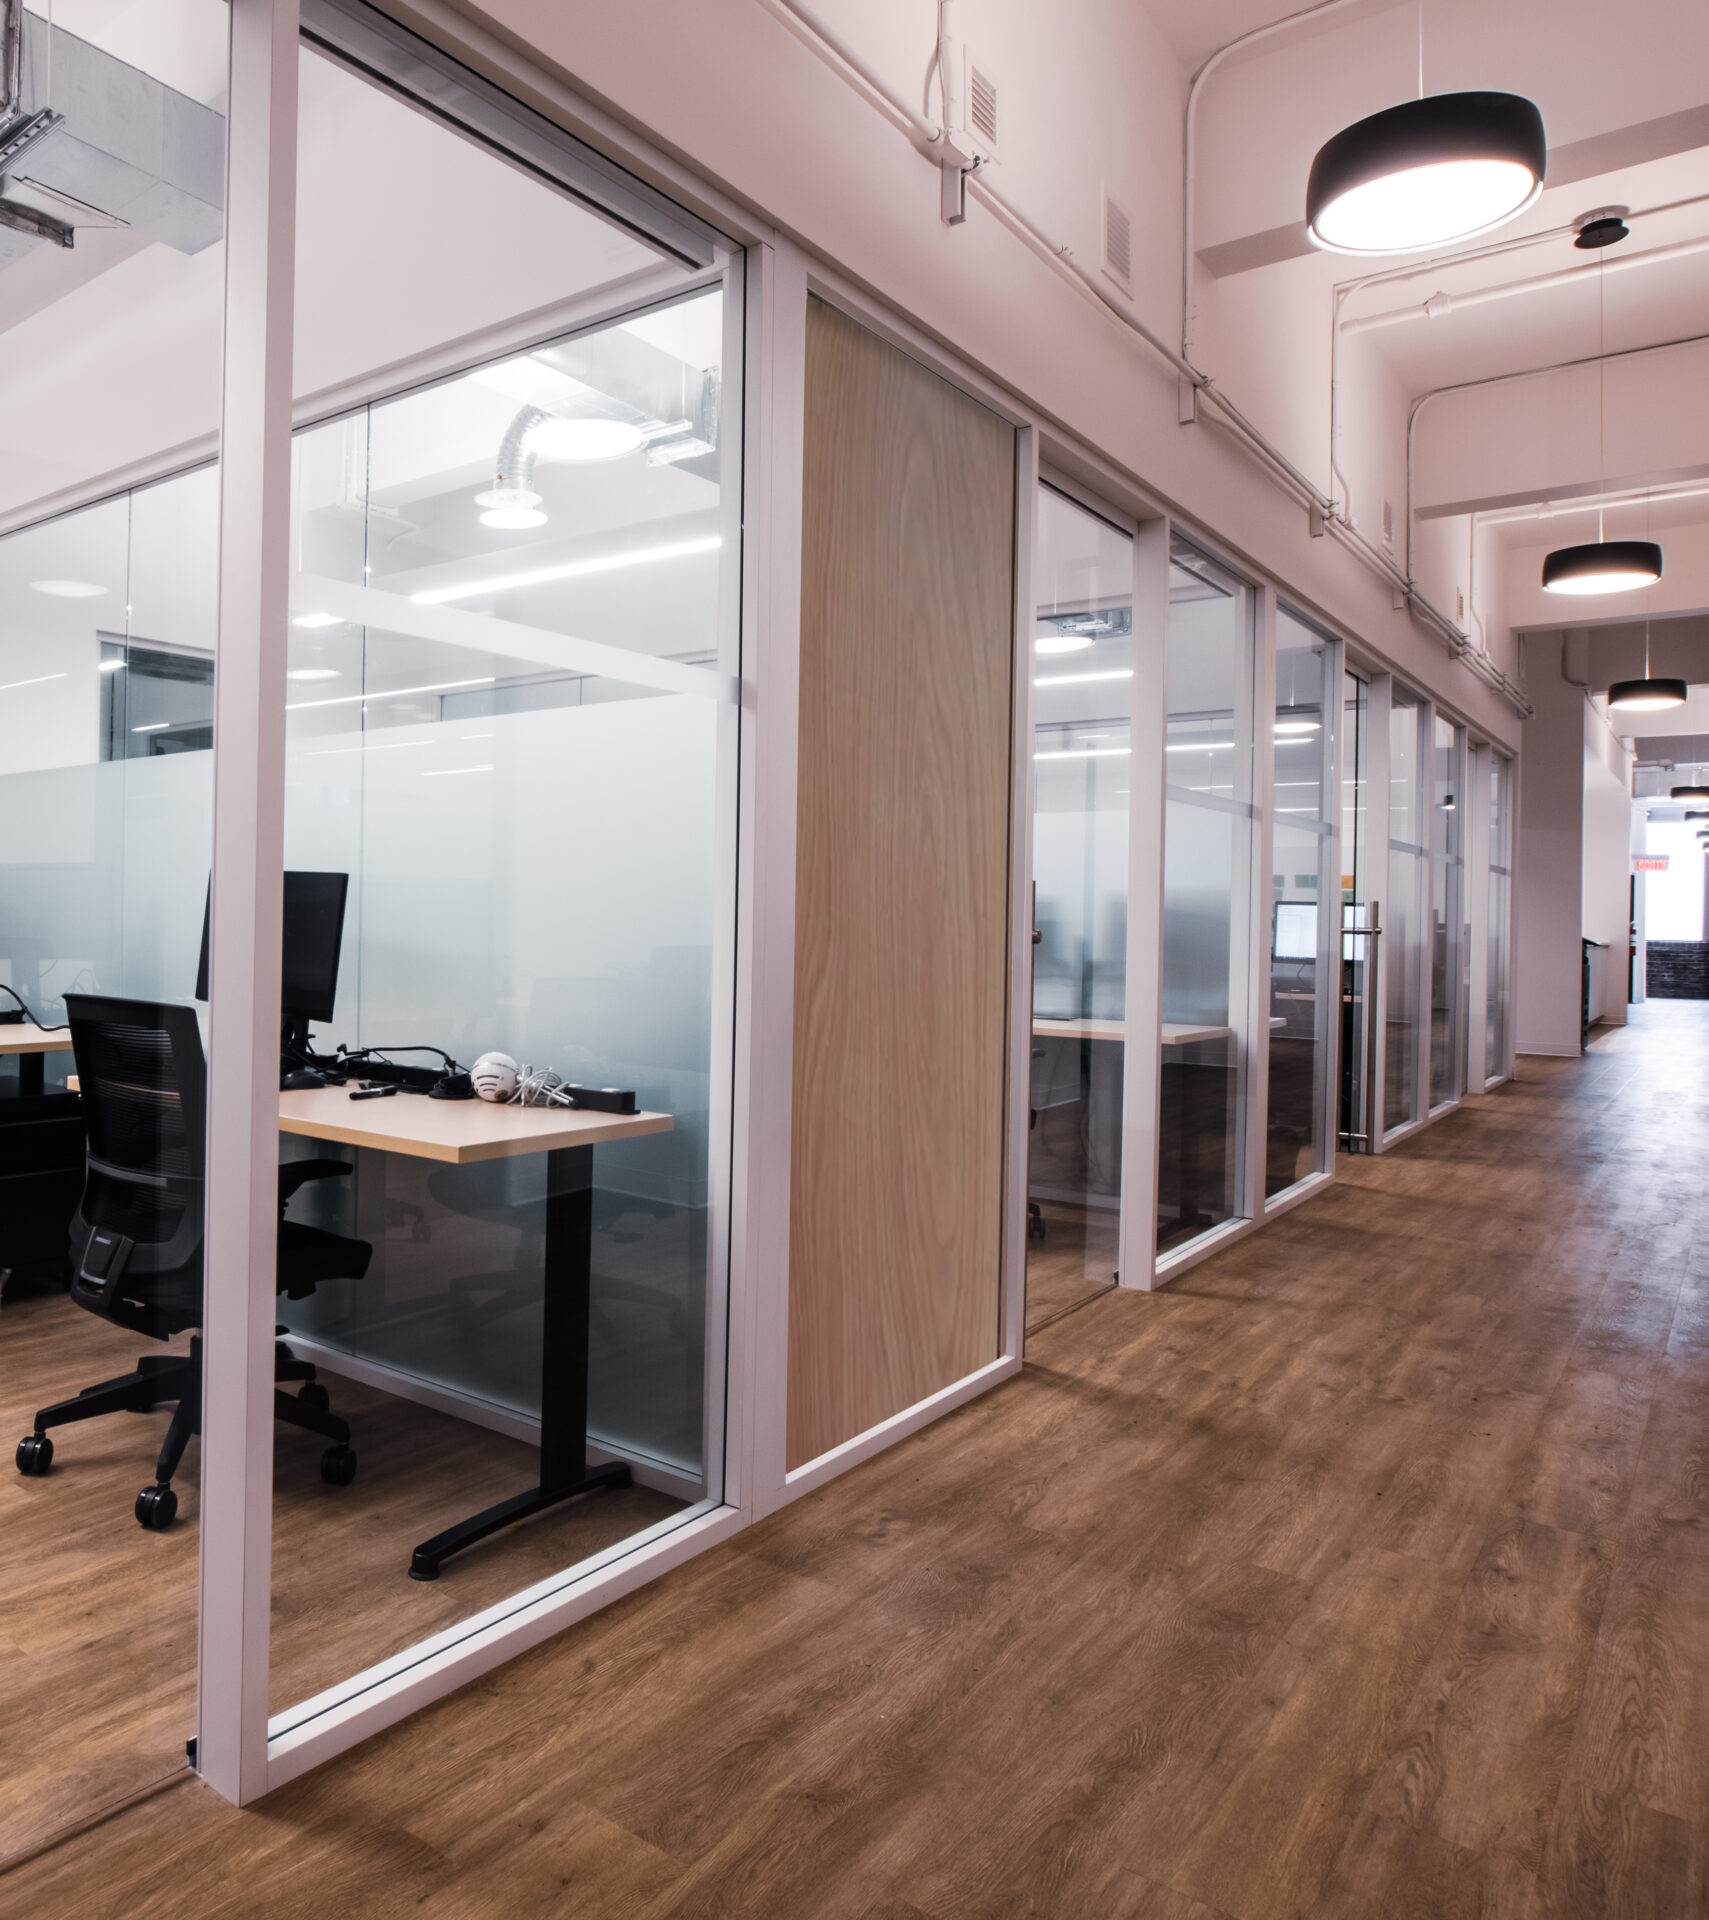 Starwall's versatility in action: 
Wood veneer panel integrated in place of glass